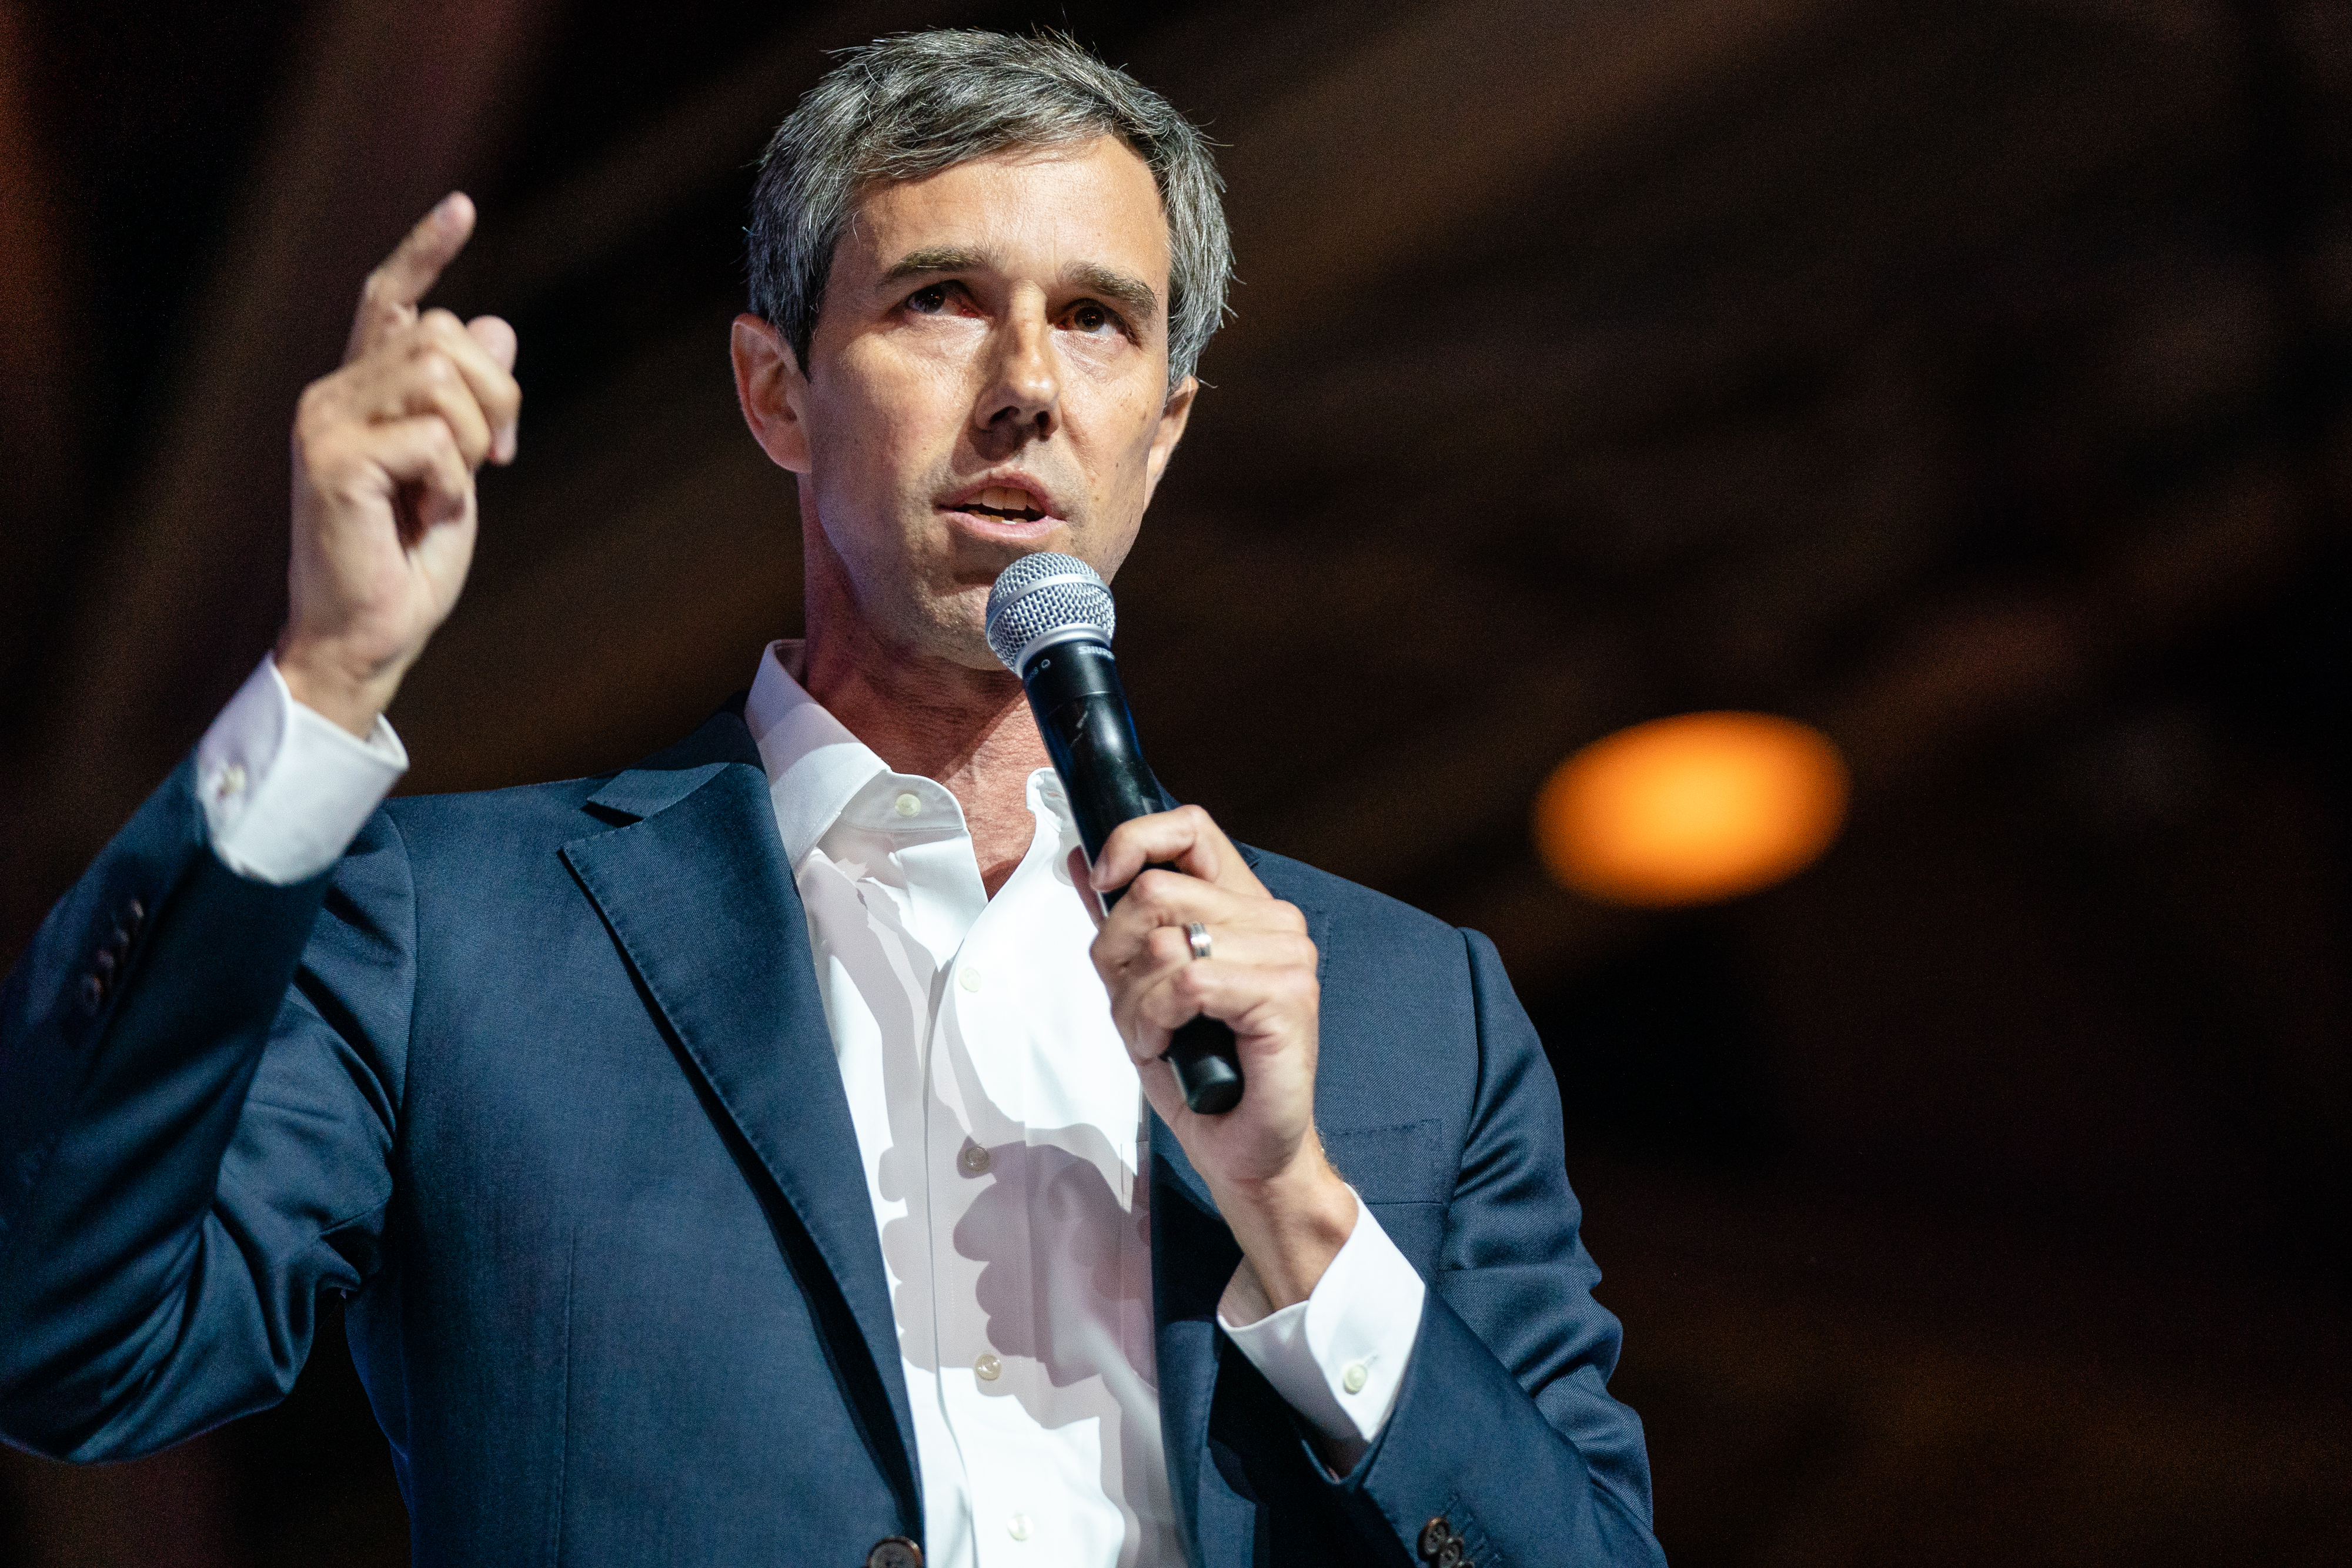 Beto O'Rourke speaks at the 25th Essence Festival at Ernest N. Morial Convention Center on July 06, 2019 in New Orleans, Louisiana. (Josh Brasted—FilmMagic)